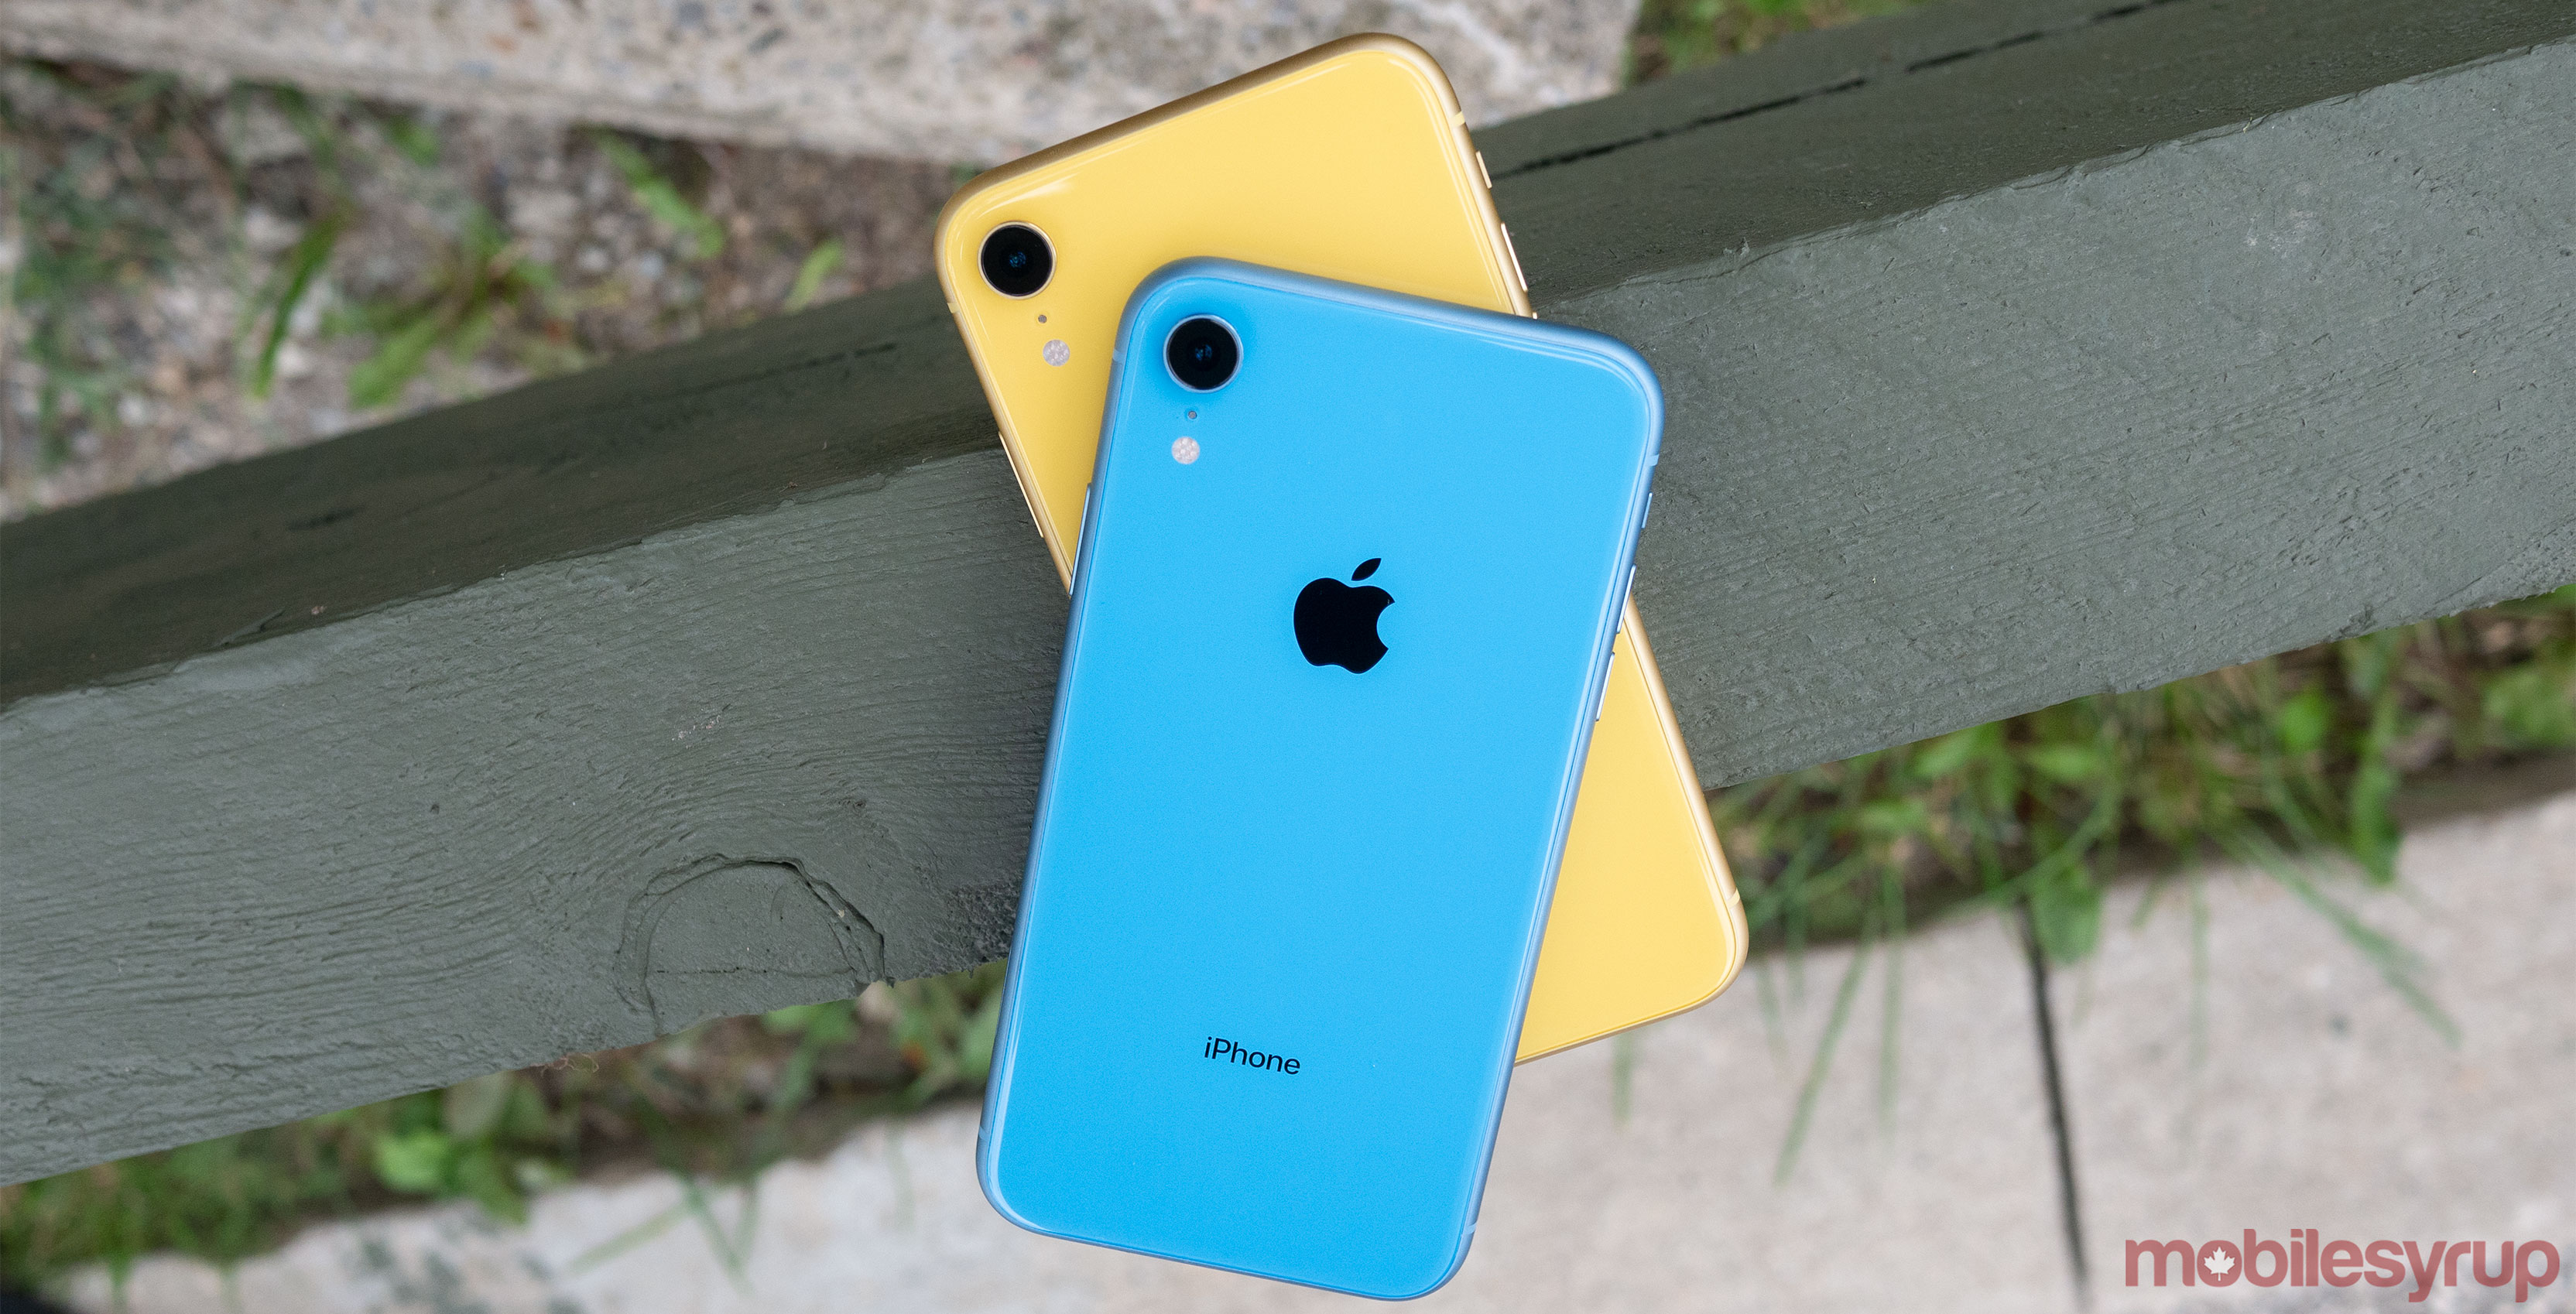 Could these glass shards be the colours for Apple's next iPhone XR?